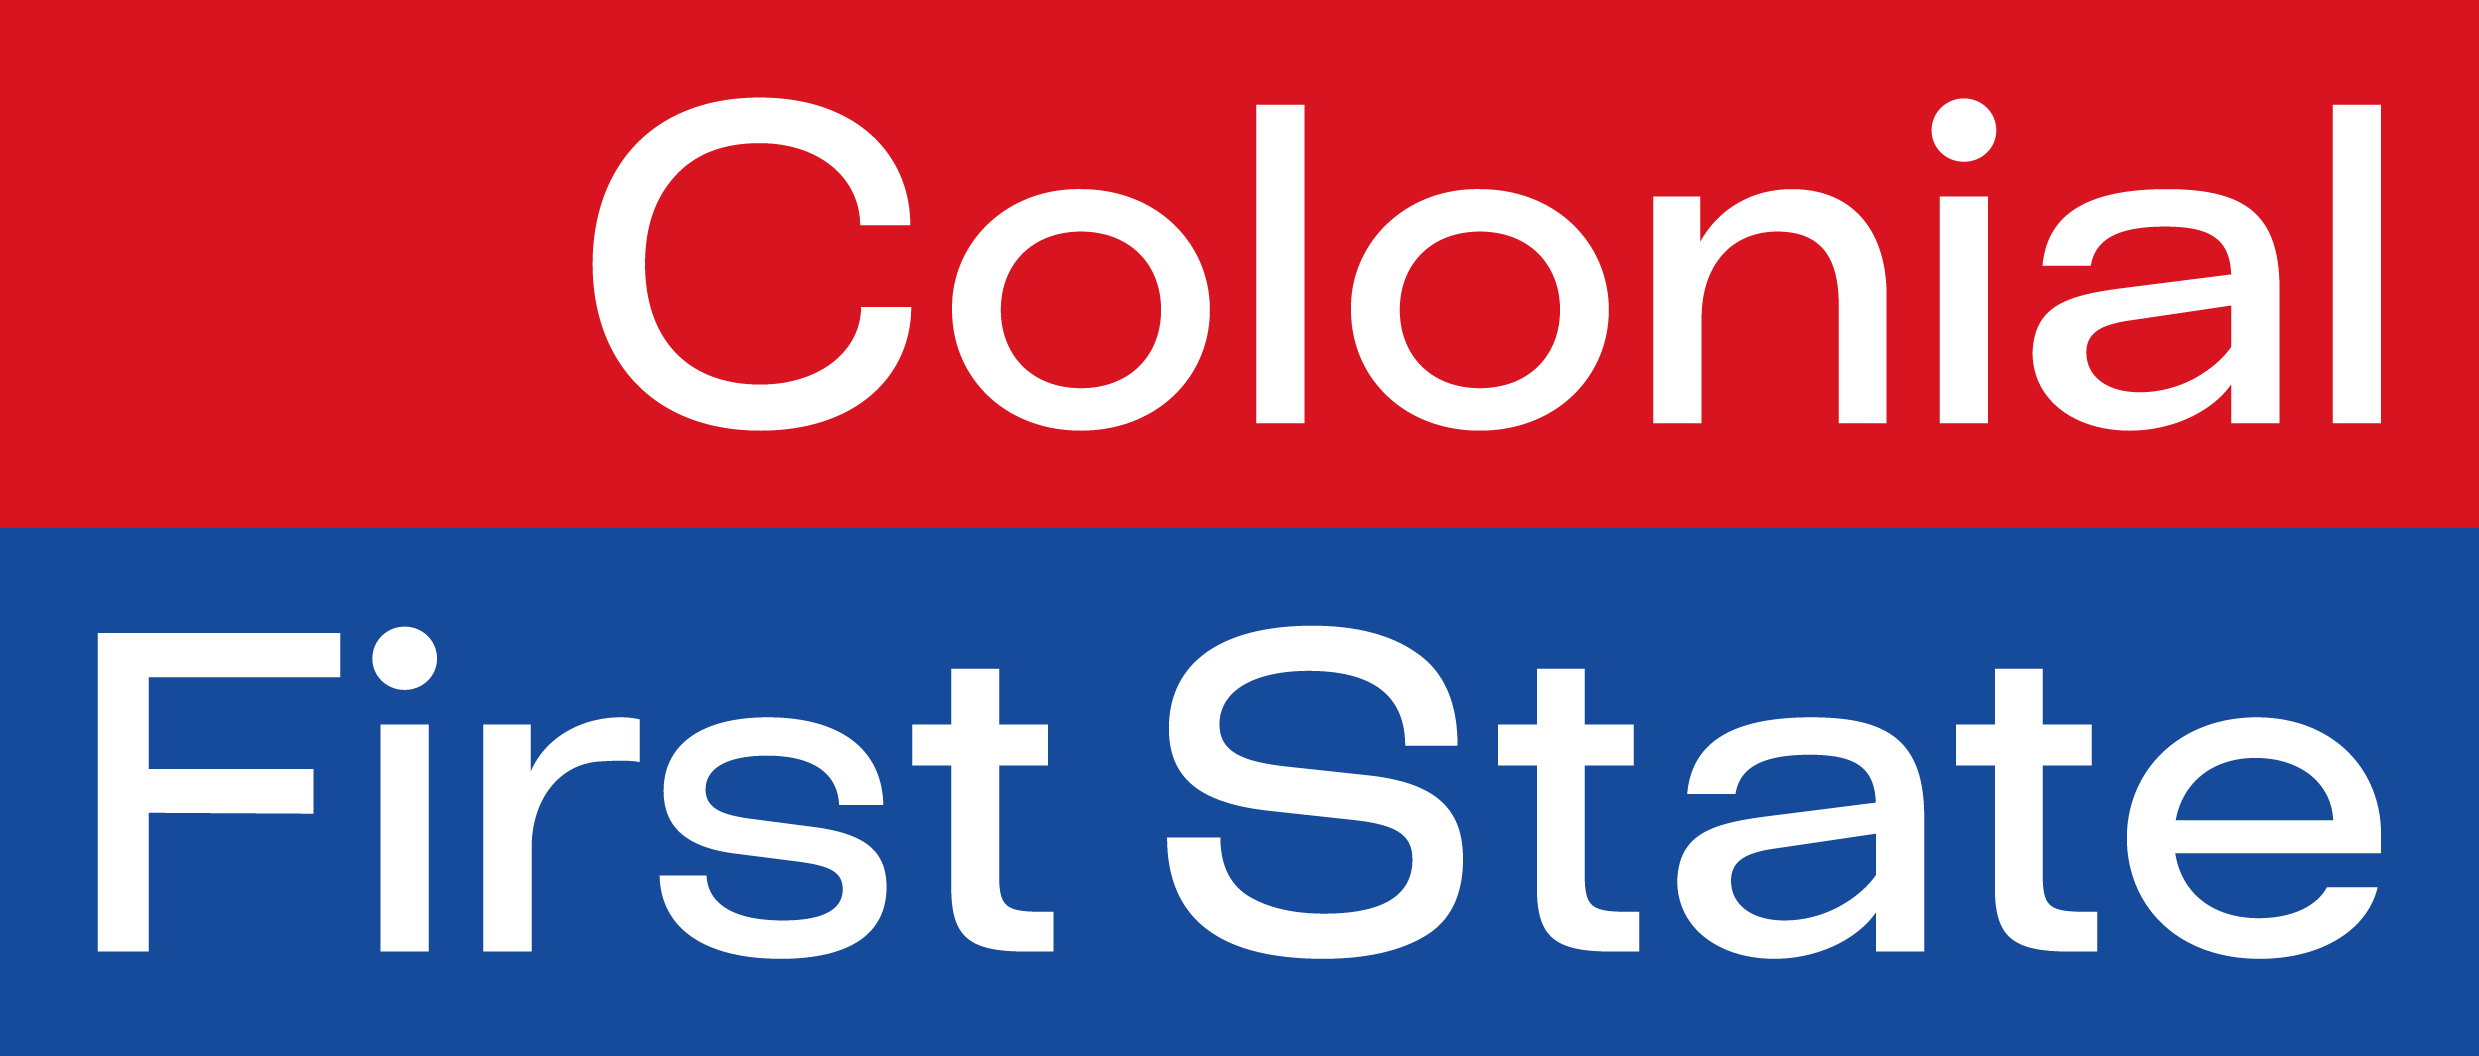 Colonial Fist State Logo